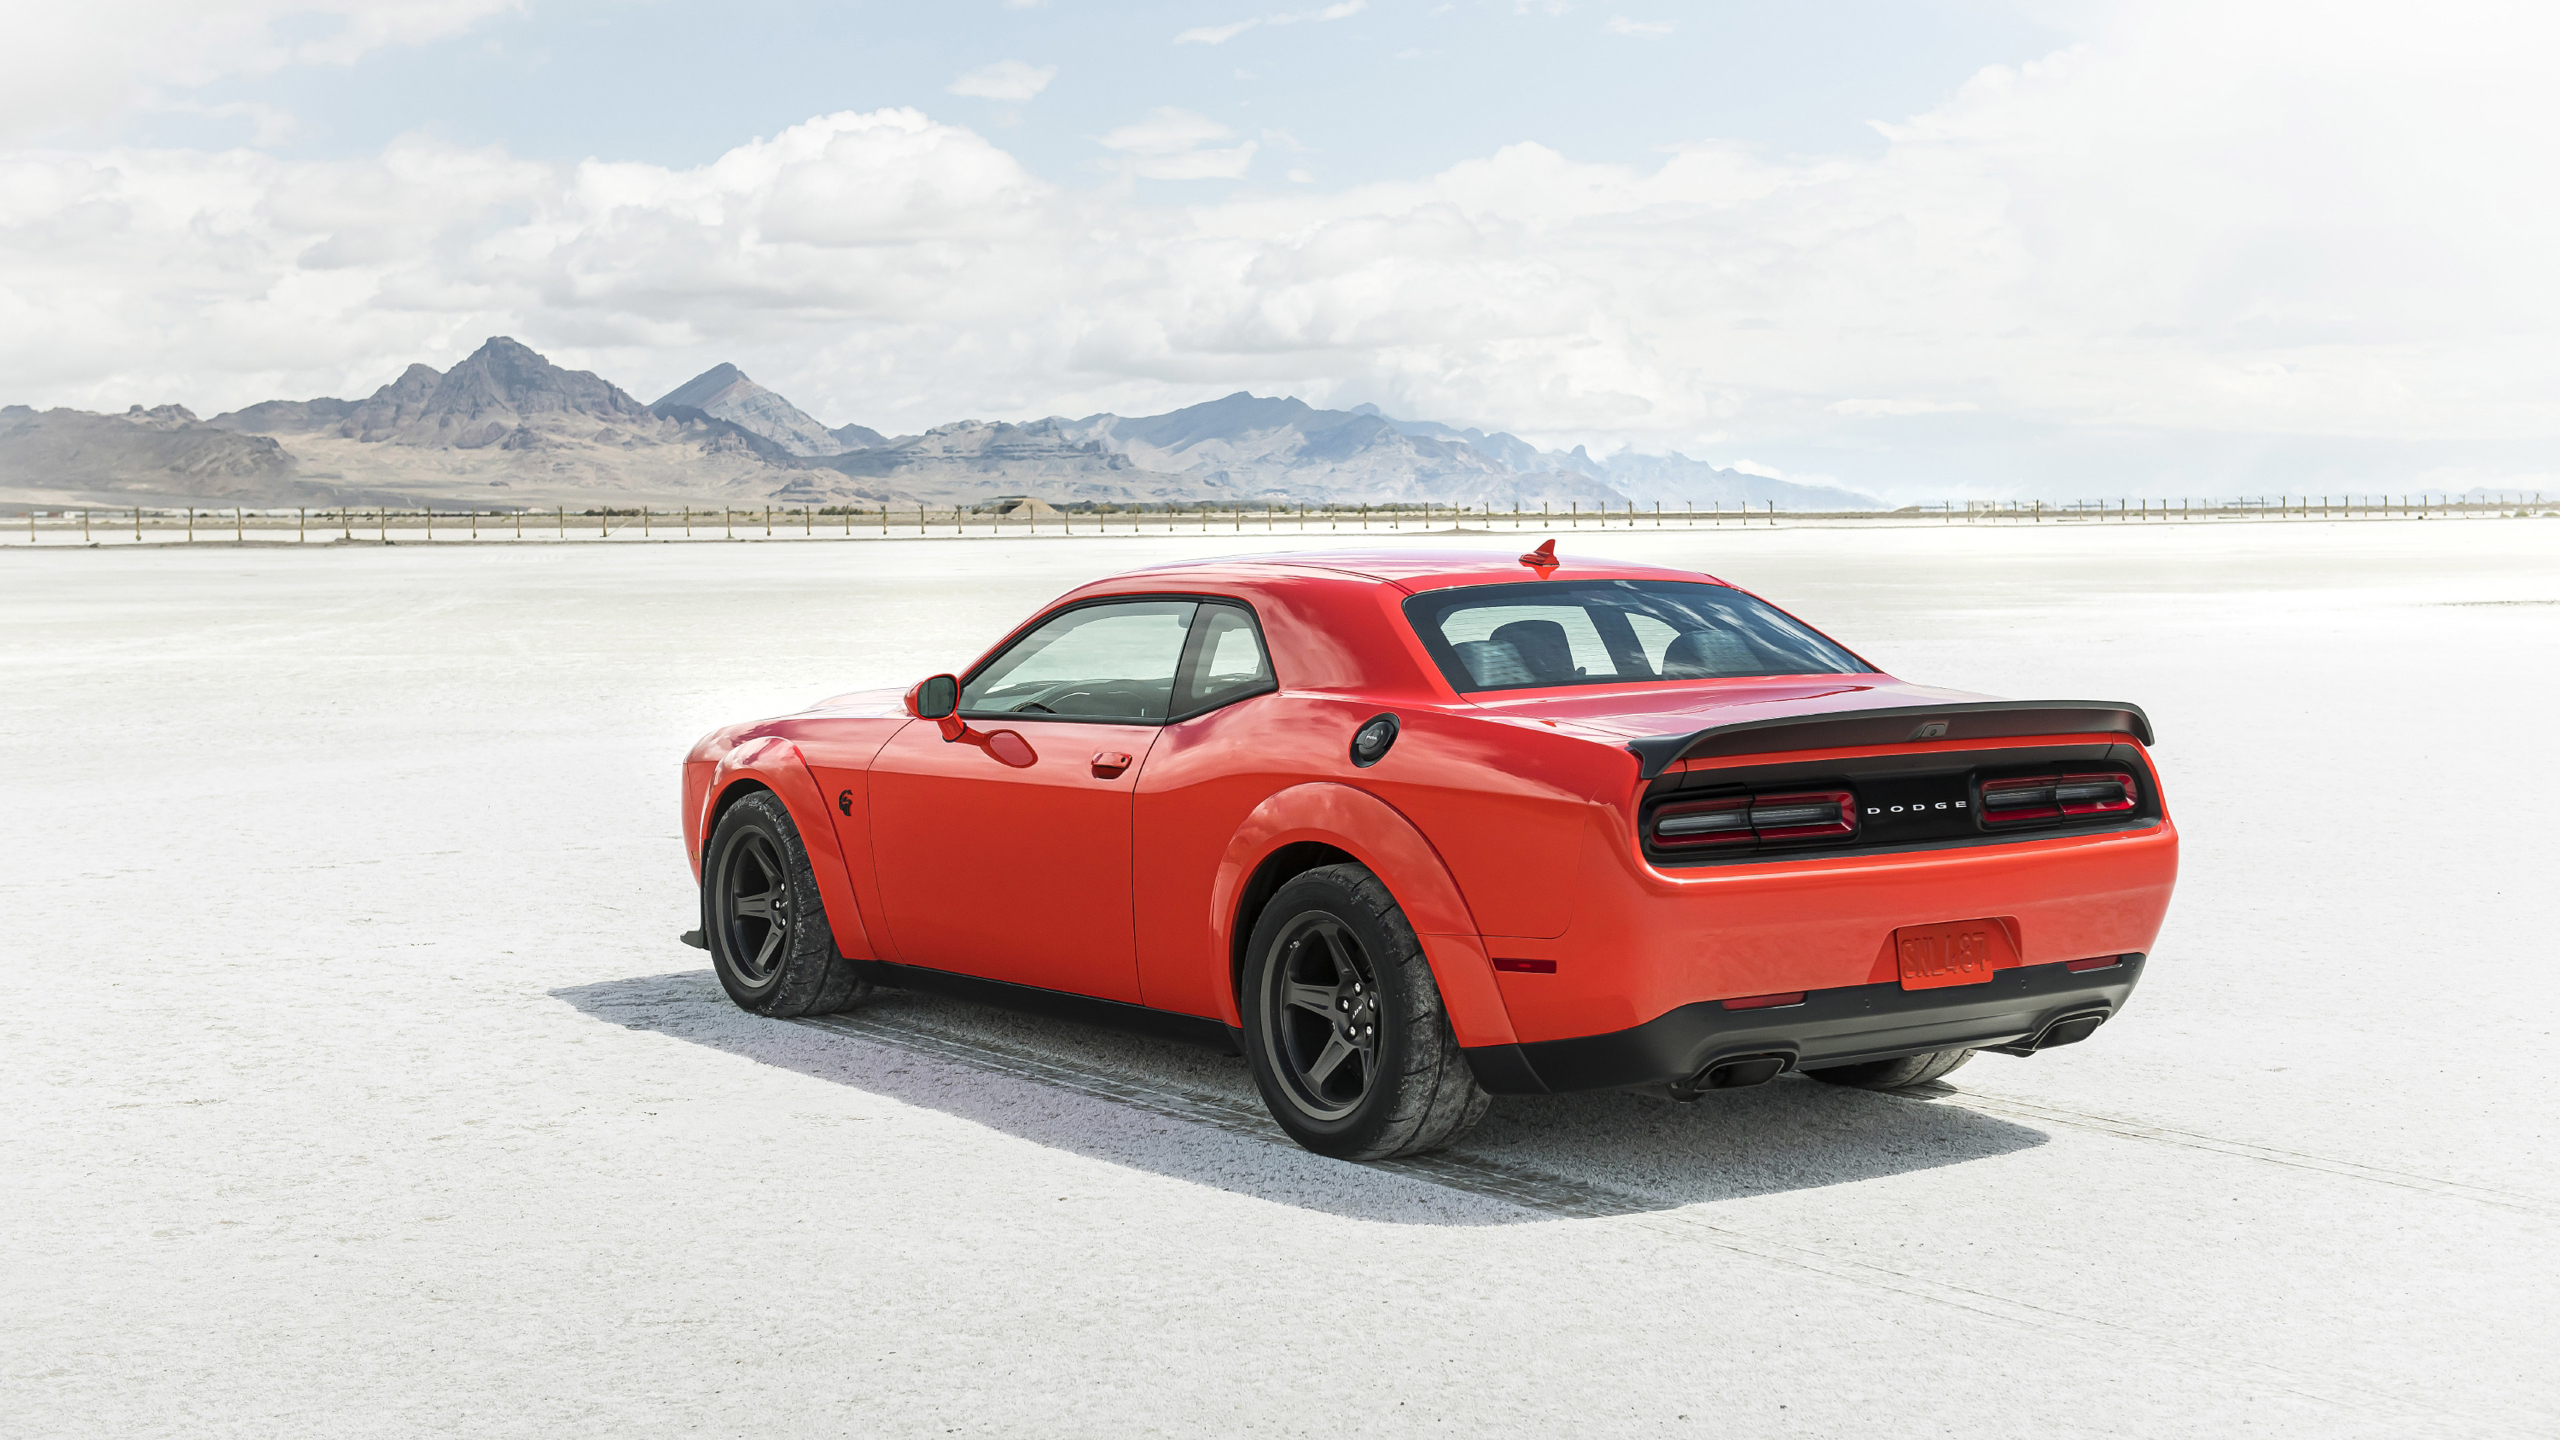 Dodge Challenger SRT Hellcat Muscle Cars Car Vehicle Red Cars 2560x1440